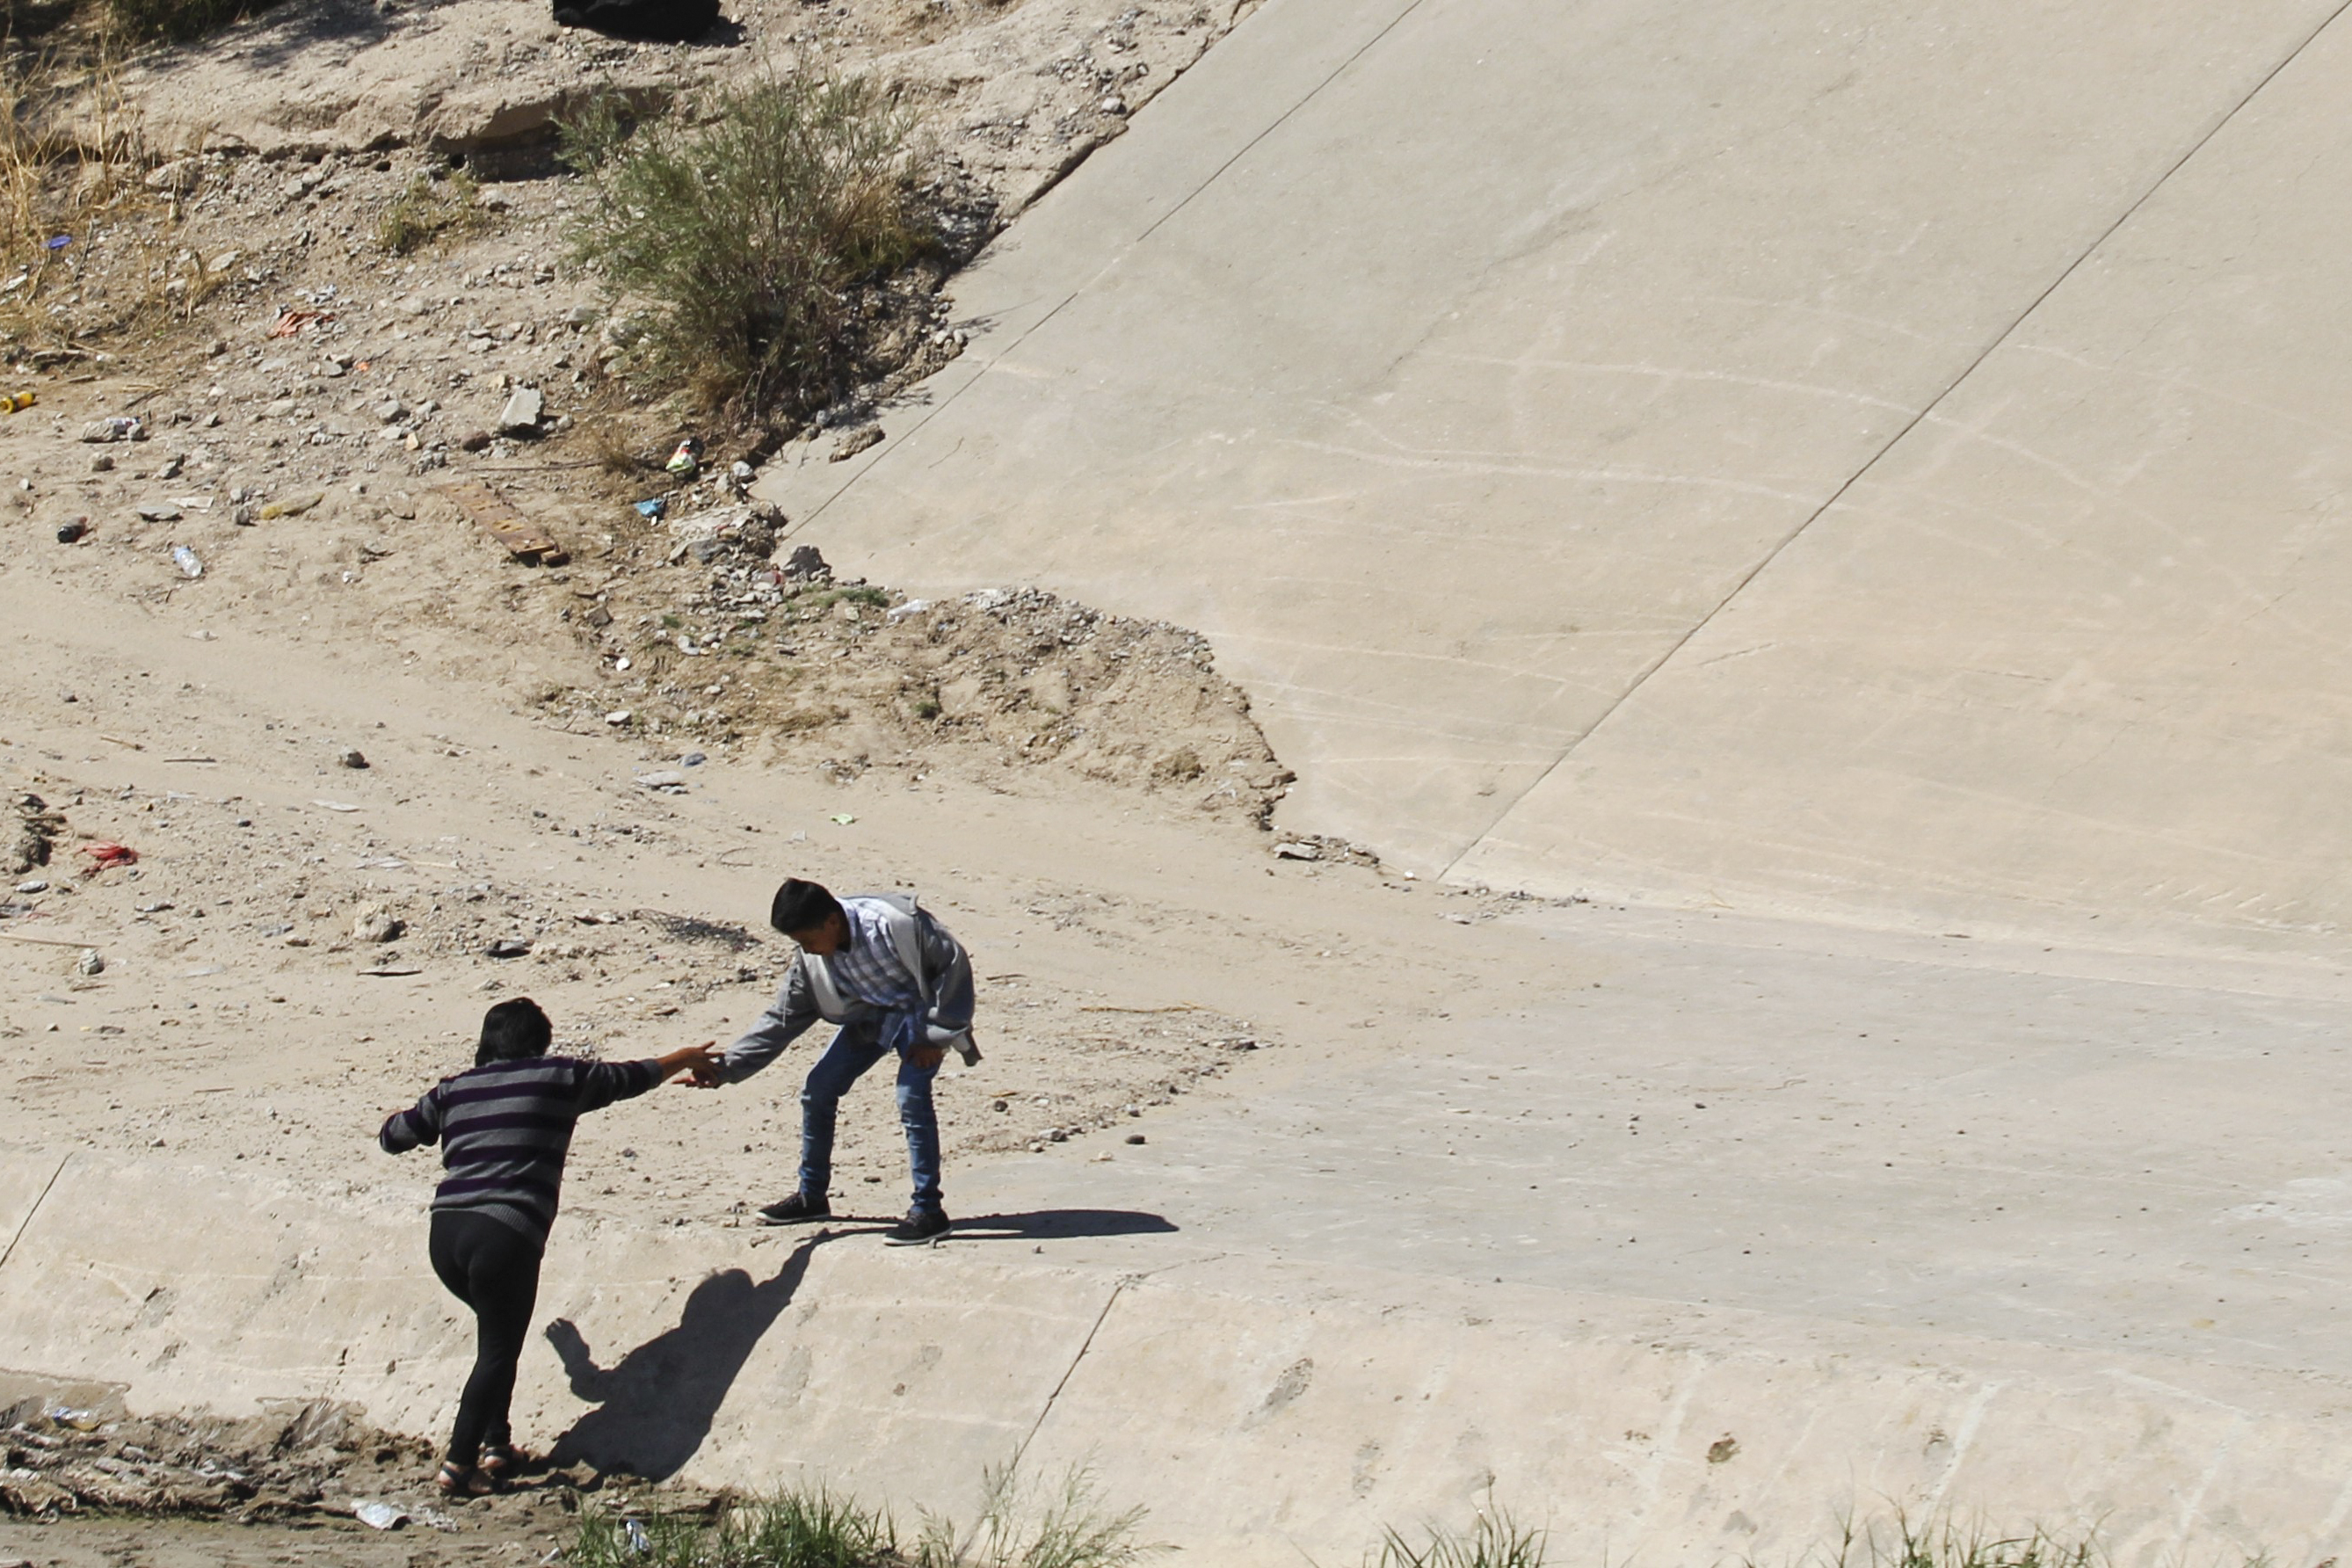 Central American Migrants Cross The Rio Bravo River In Chihuahua (Photo by HERIKA MARTINEZ/AFP/Getty Images)